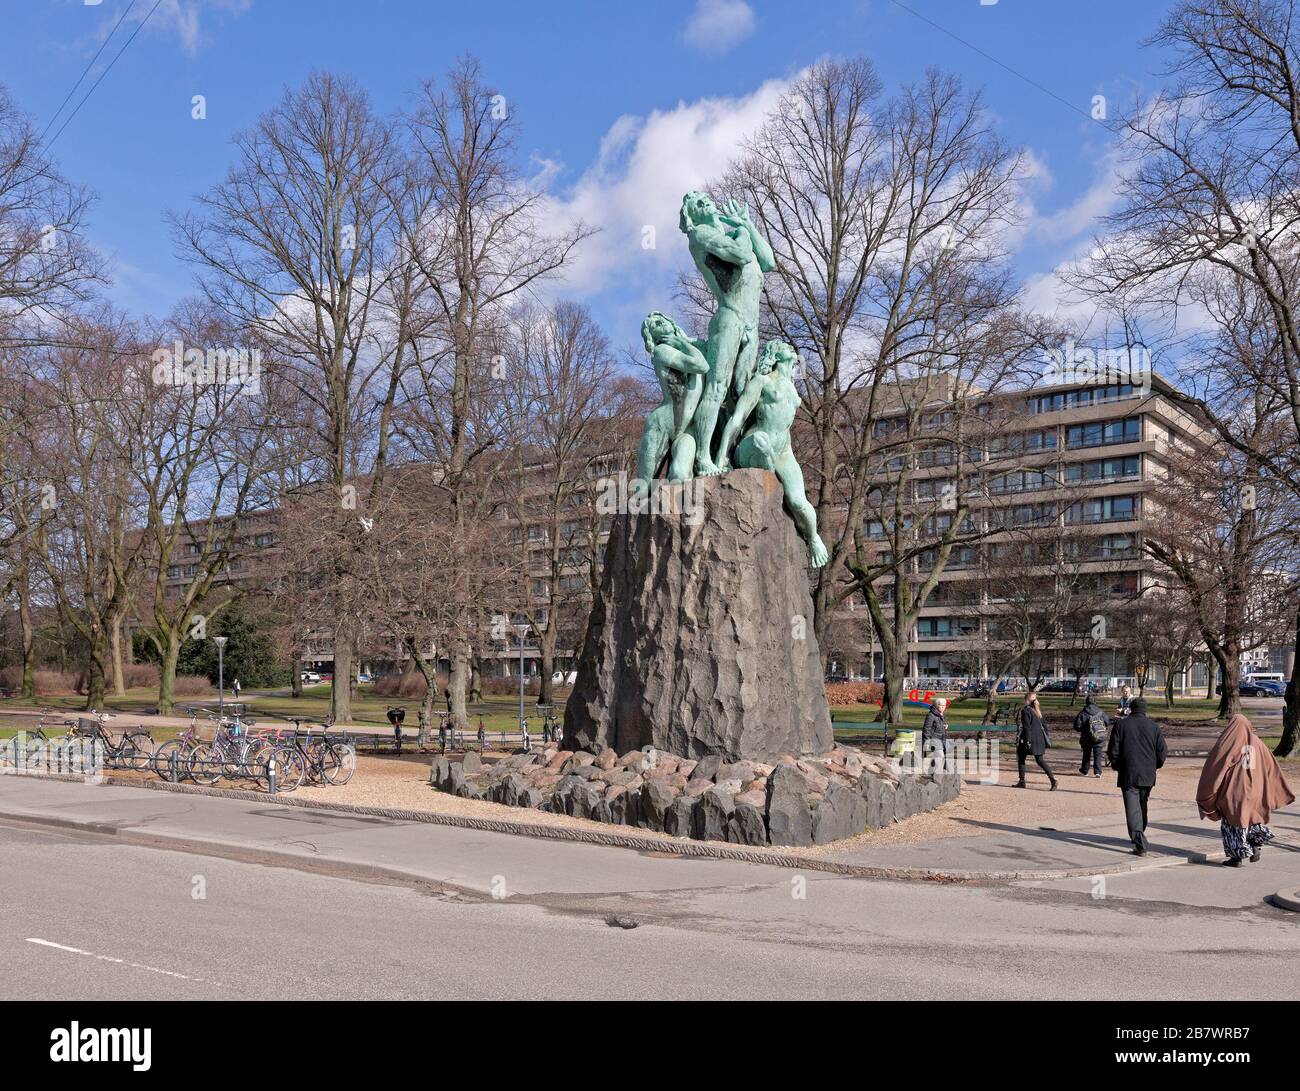 Mod lyset, Towards the Light, at Rigshospitalet, the National Hospital of Denmark. By Rudolph Tegner in memory of Niels Finsen's UV light discoveries. Stock Photo